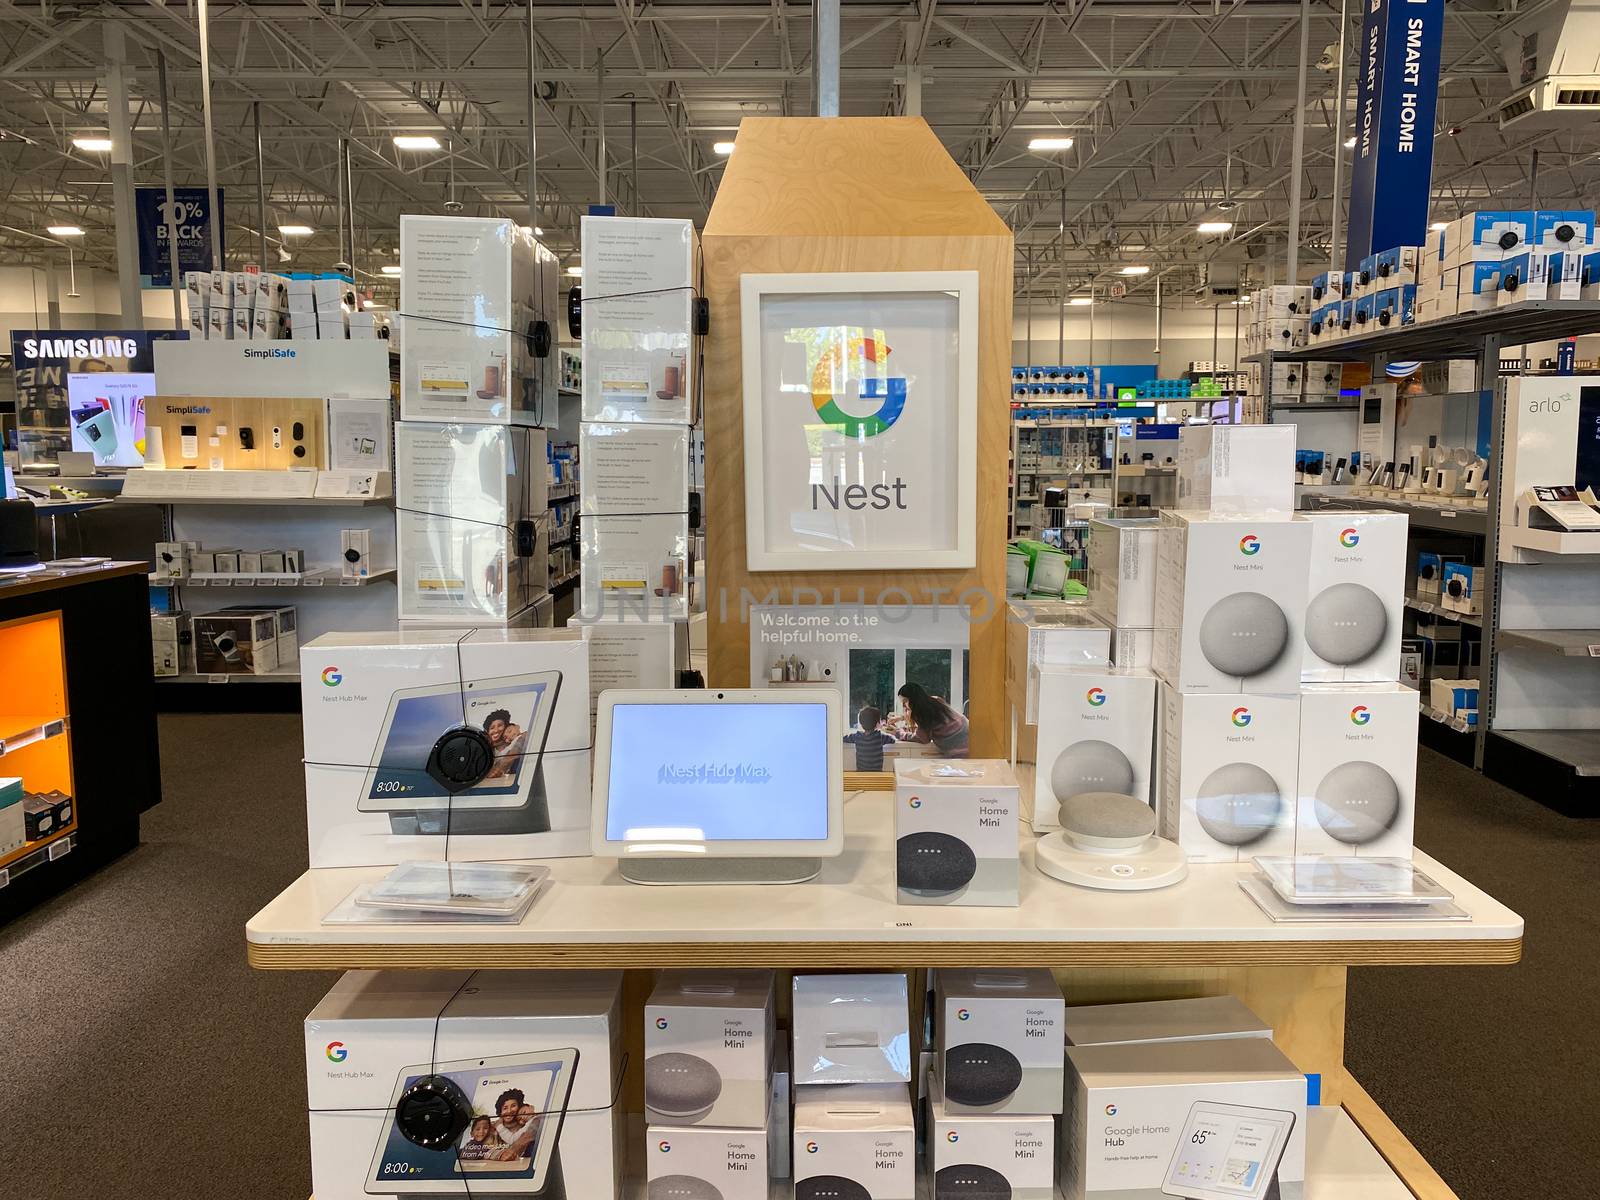 Orlando, FL/USA - 10/14/20:  The Google Nest Home device display at Best Buy in Orlando, Florida